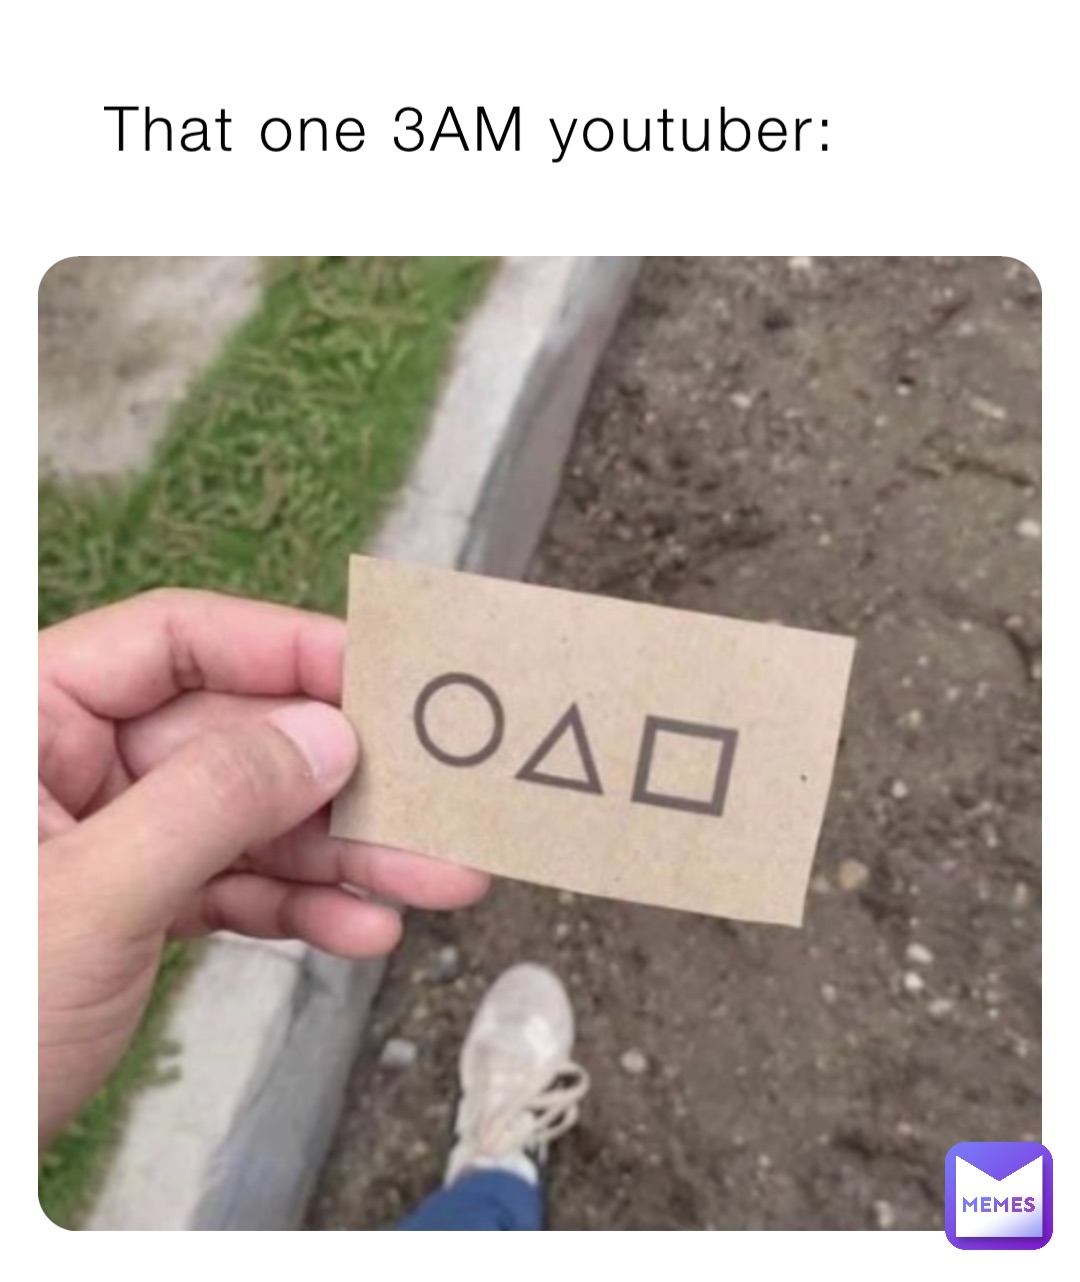 That one 3AM youtuber: